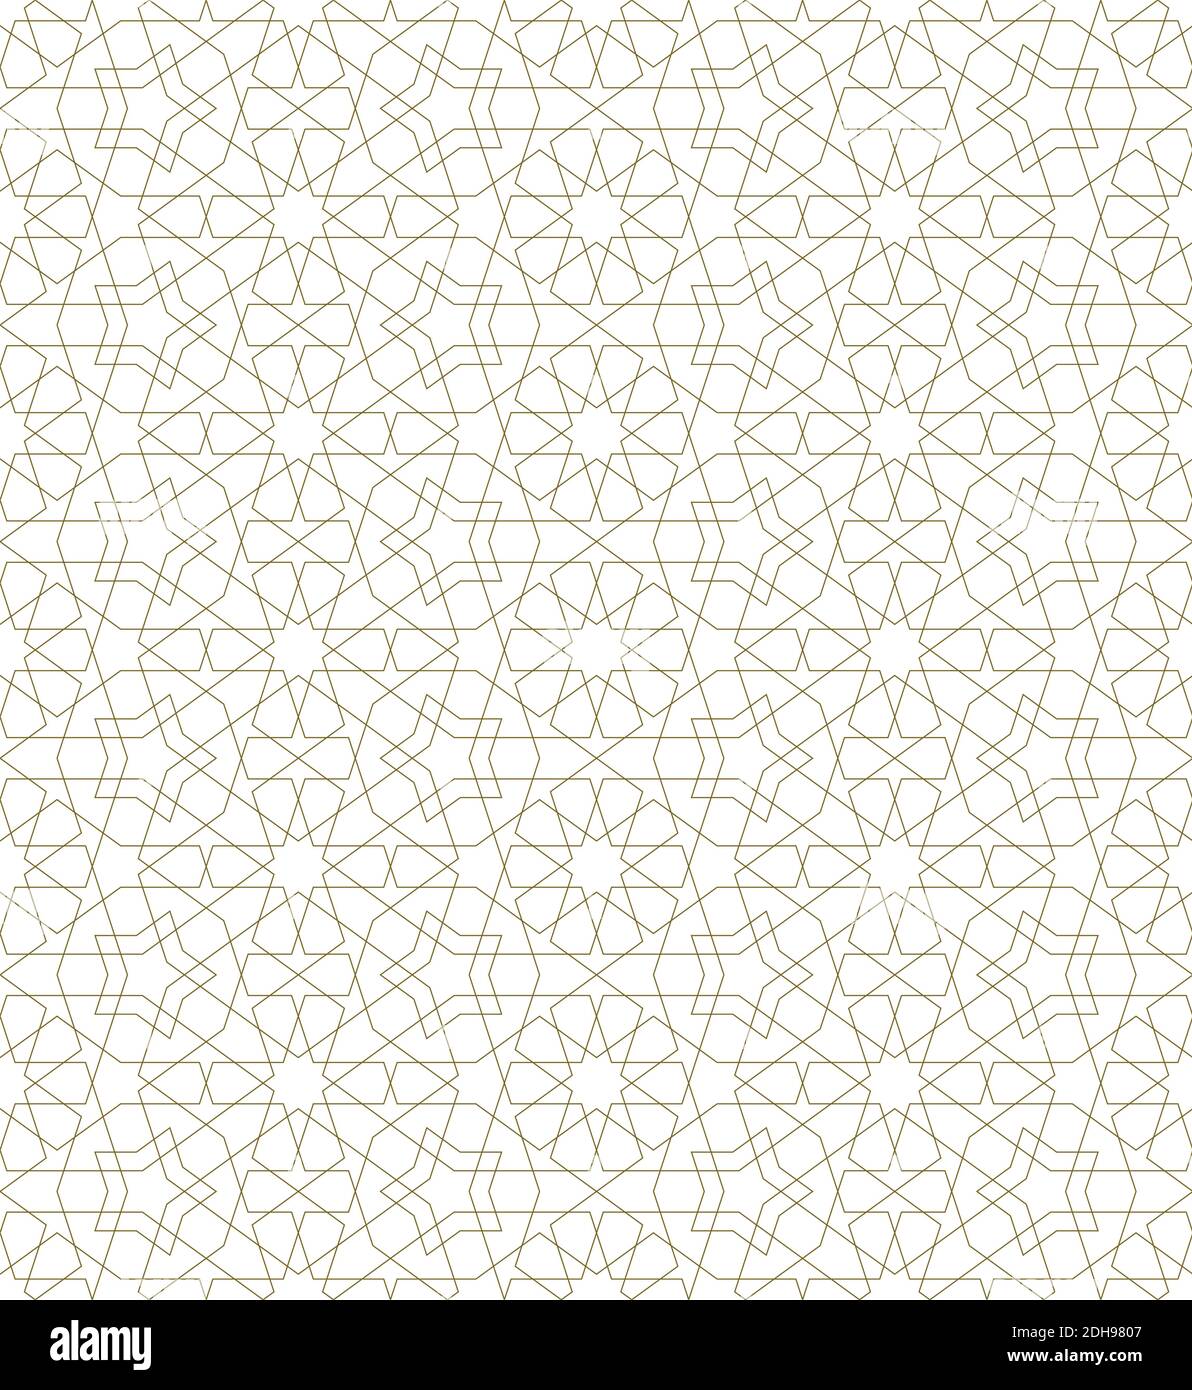 Background seamless pattern based on traditional islamic art.Brown color.Great design for fabric,textile,cover,wrapping paper,background.Fine lines. Stock Vector